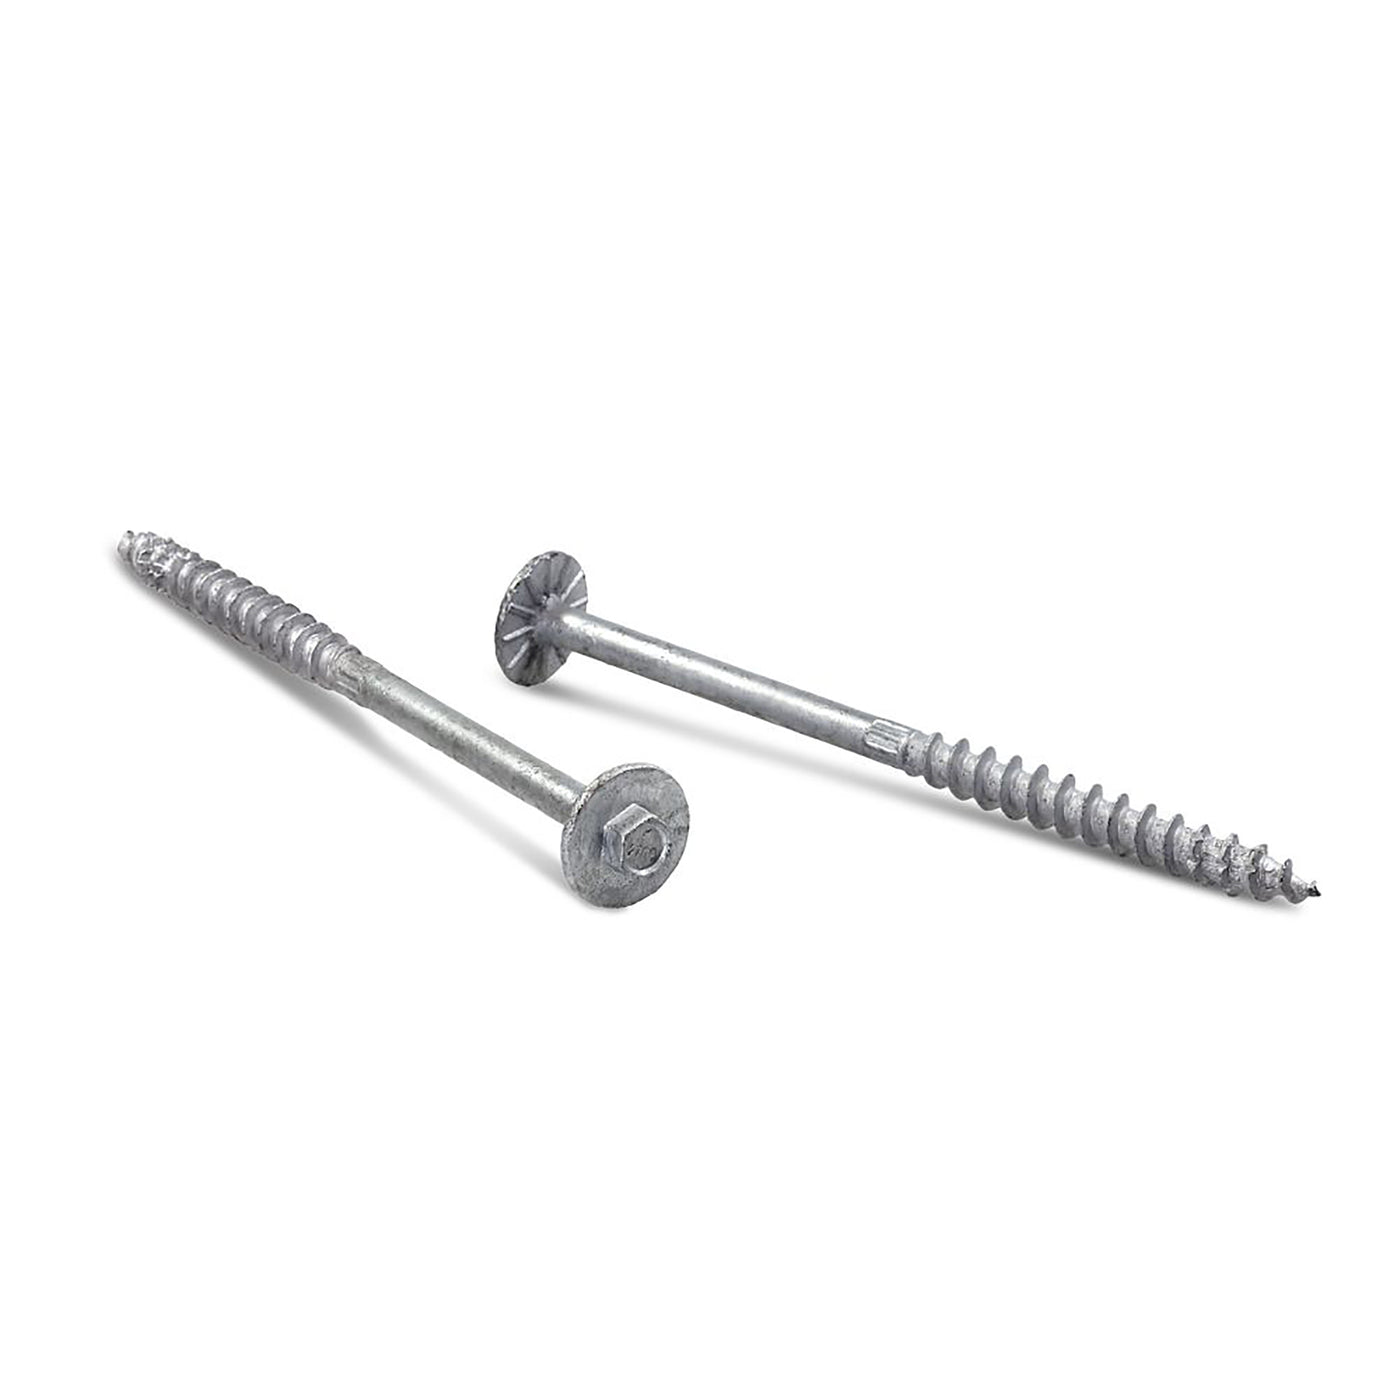 0.276 x 4 Simpson Strong-Drive® SDWH TIMBER-HEX Hot Dipped Galvanized 3/8 in. Hex Head Screw - Box (30)